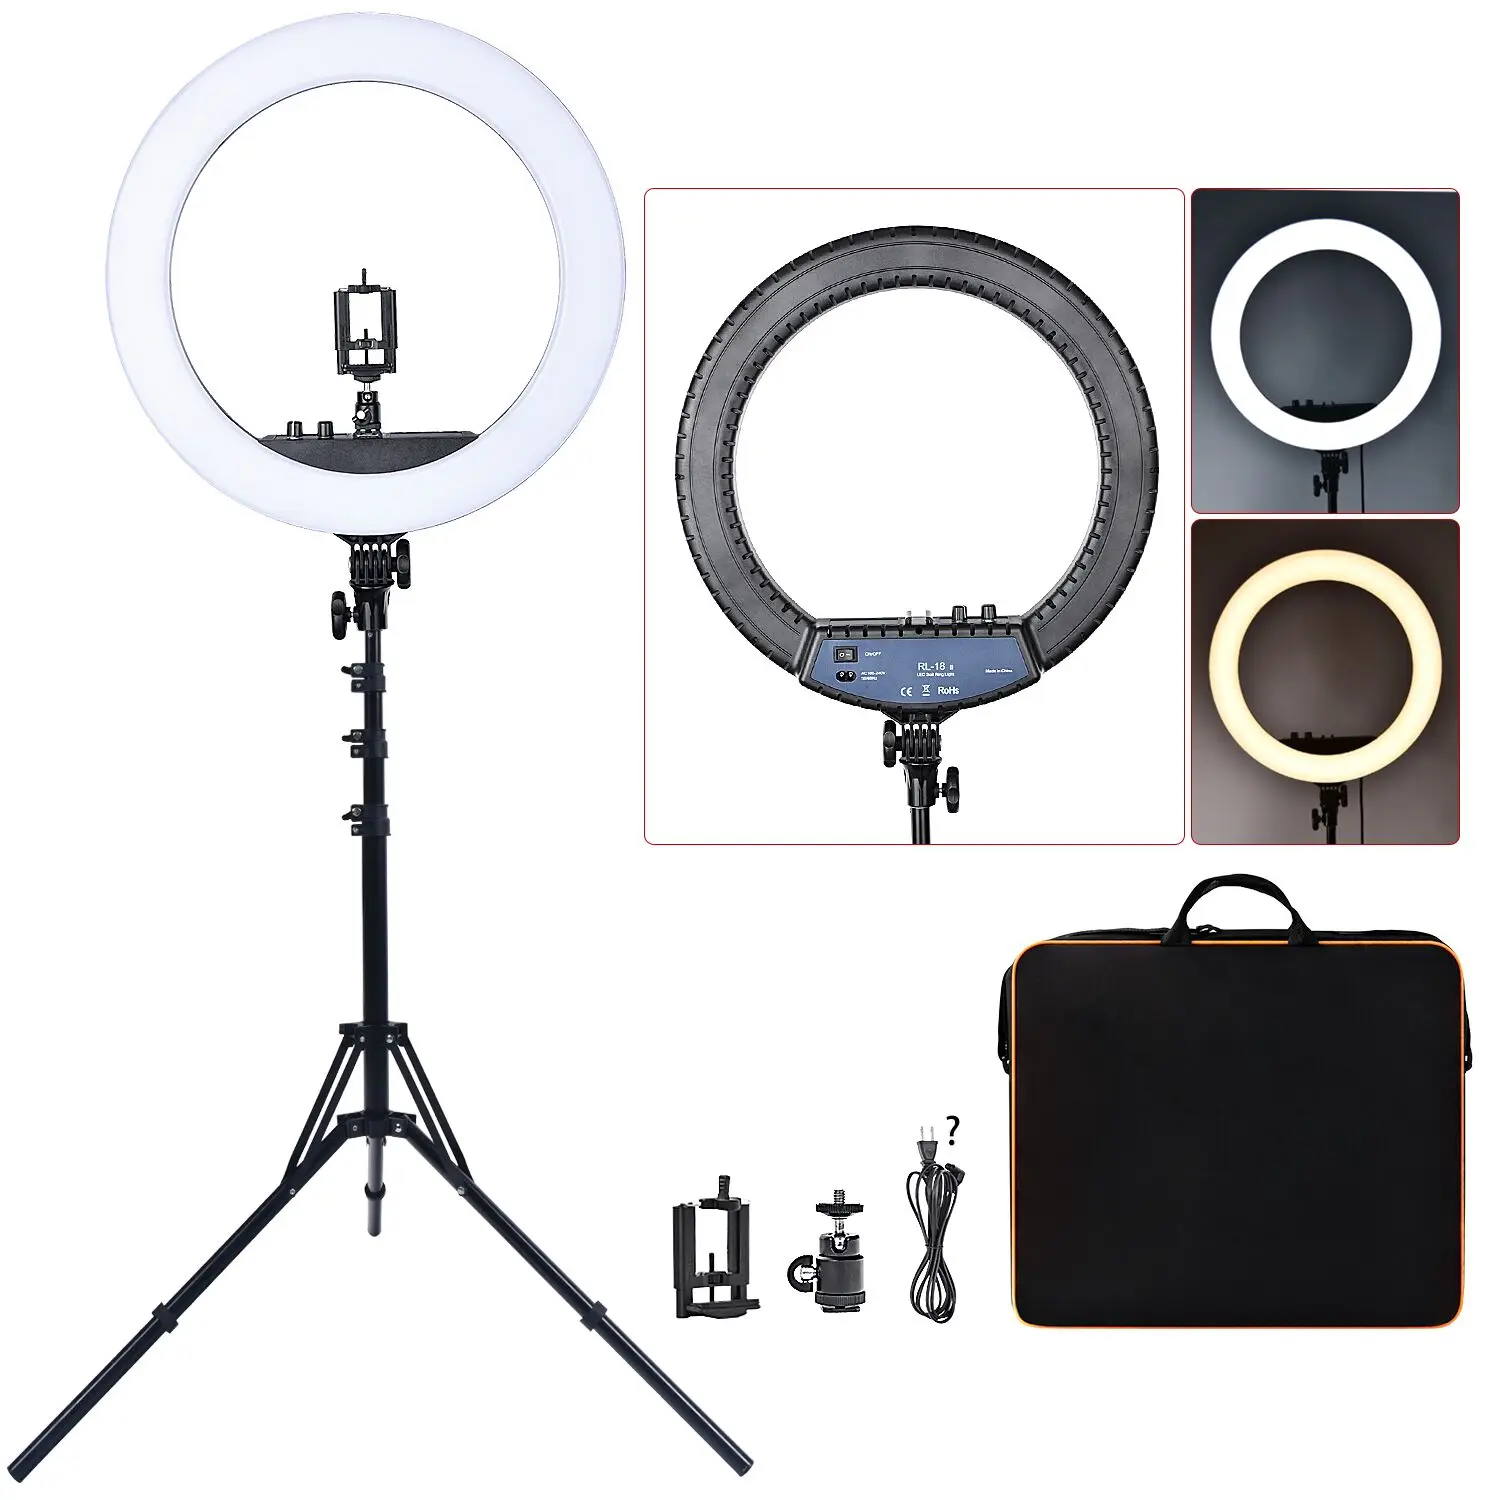 

FOSOTO RL-18II Ring Lamp 18 Inch Photographic Lighting Ringlight 512Pcs Led Ring Light With Tripod Stand For Camera Phone Makeup